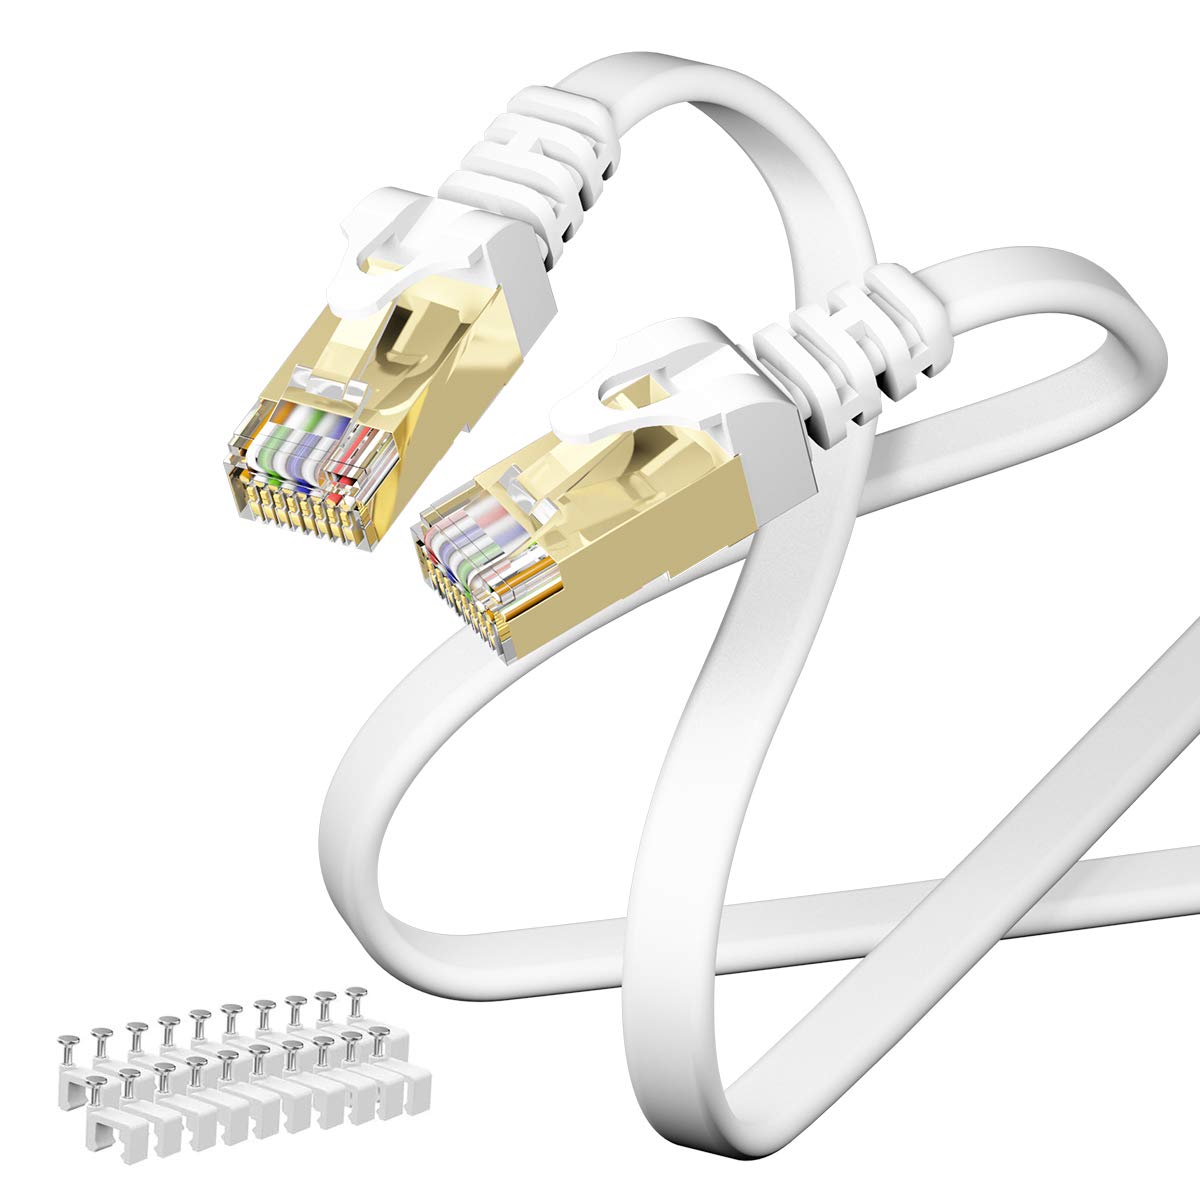 13 Best 50 Feet Ethernet Cable for 2023